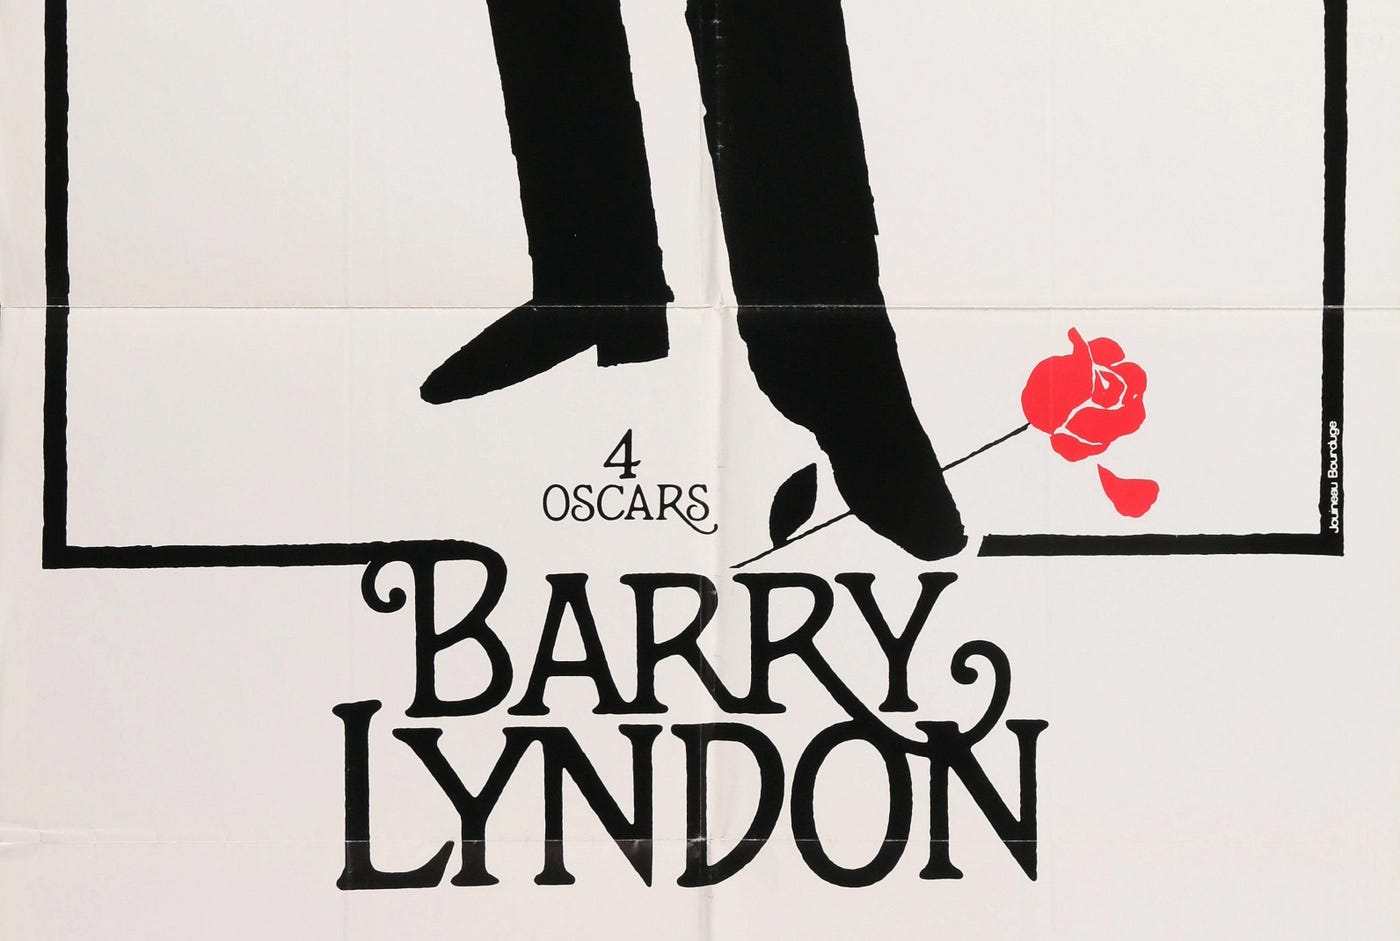 Barry Lyndon poster in detail